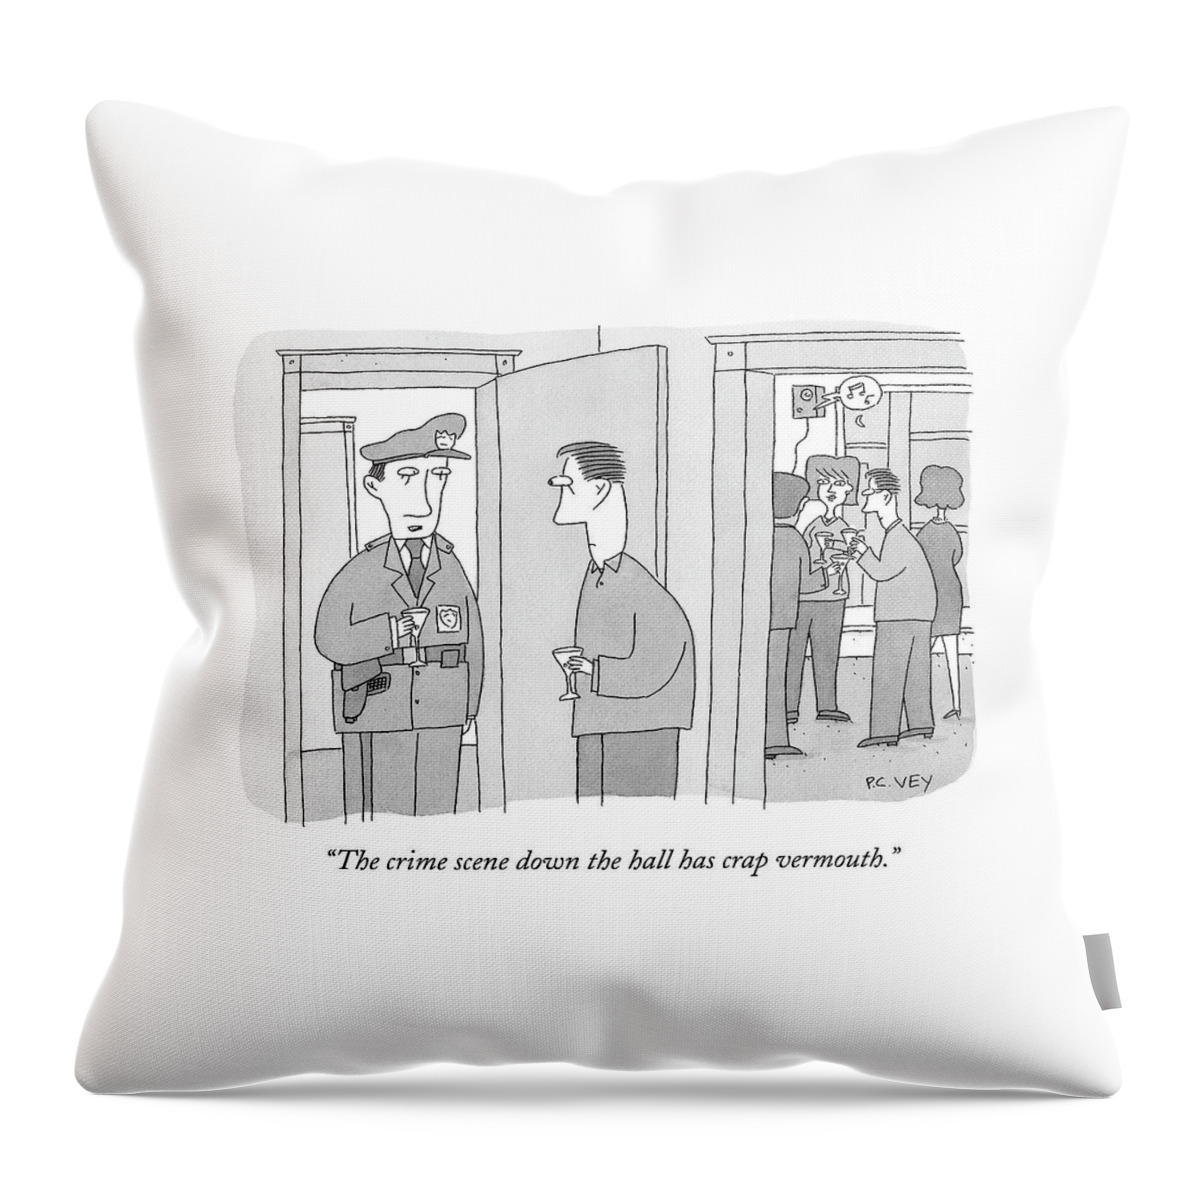 A Policeman With A Martini Glass Stands Throw Pillow